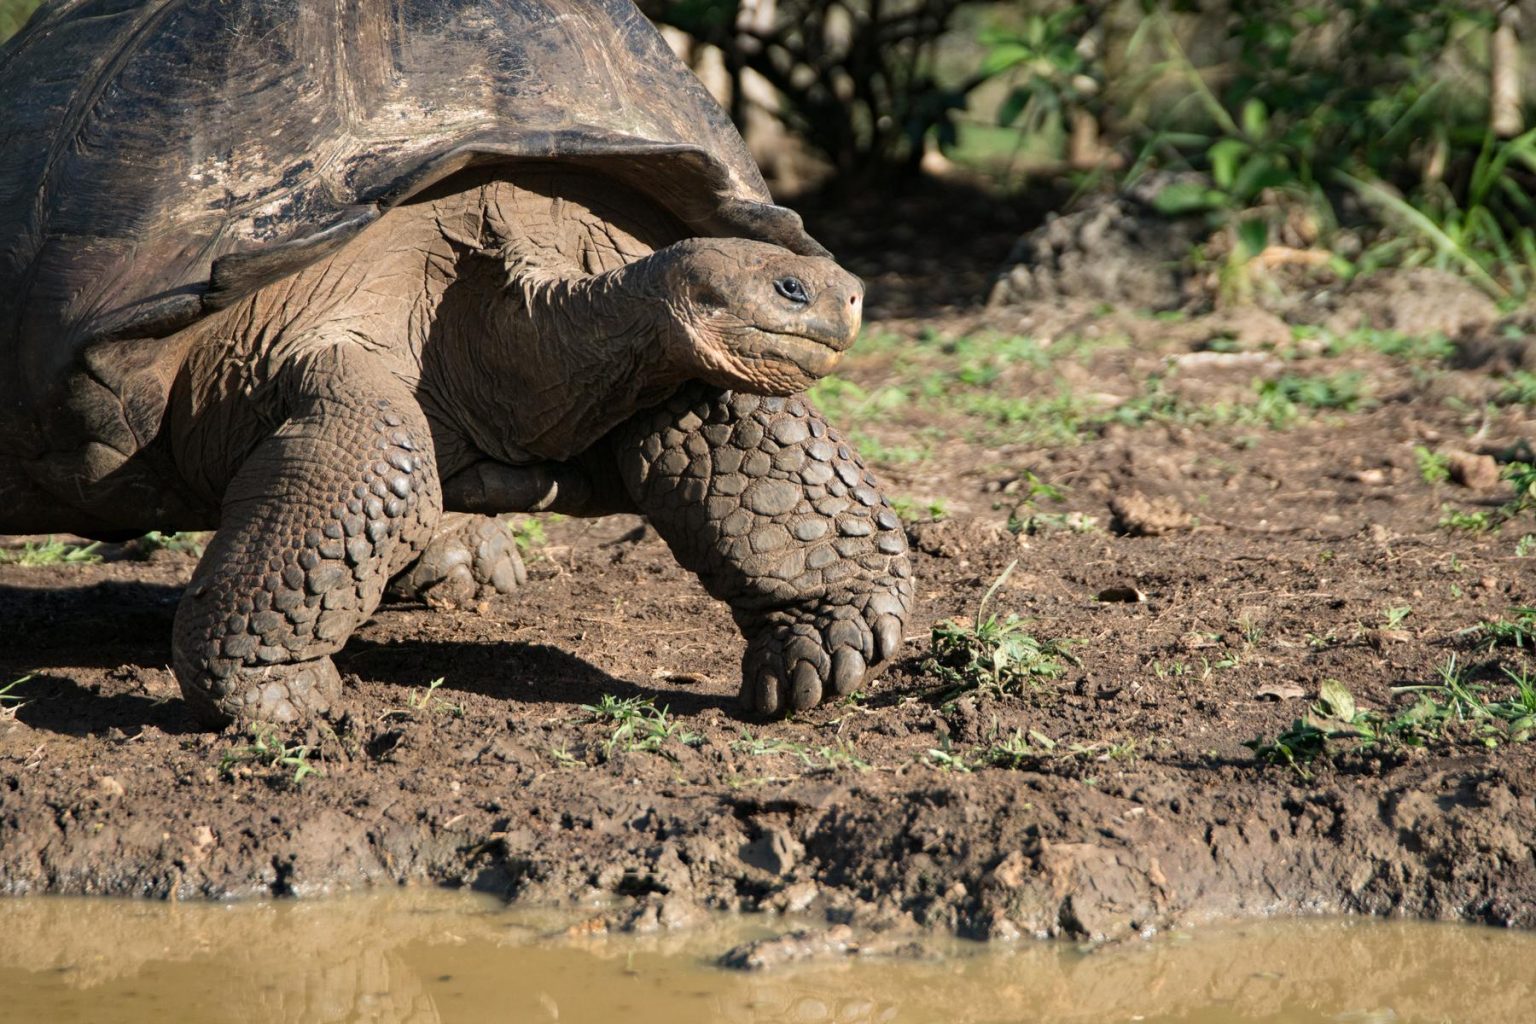 A close-up of the famed Galapagos giant tortoise